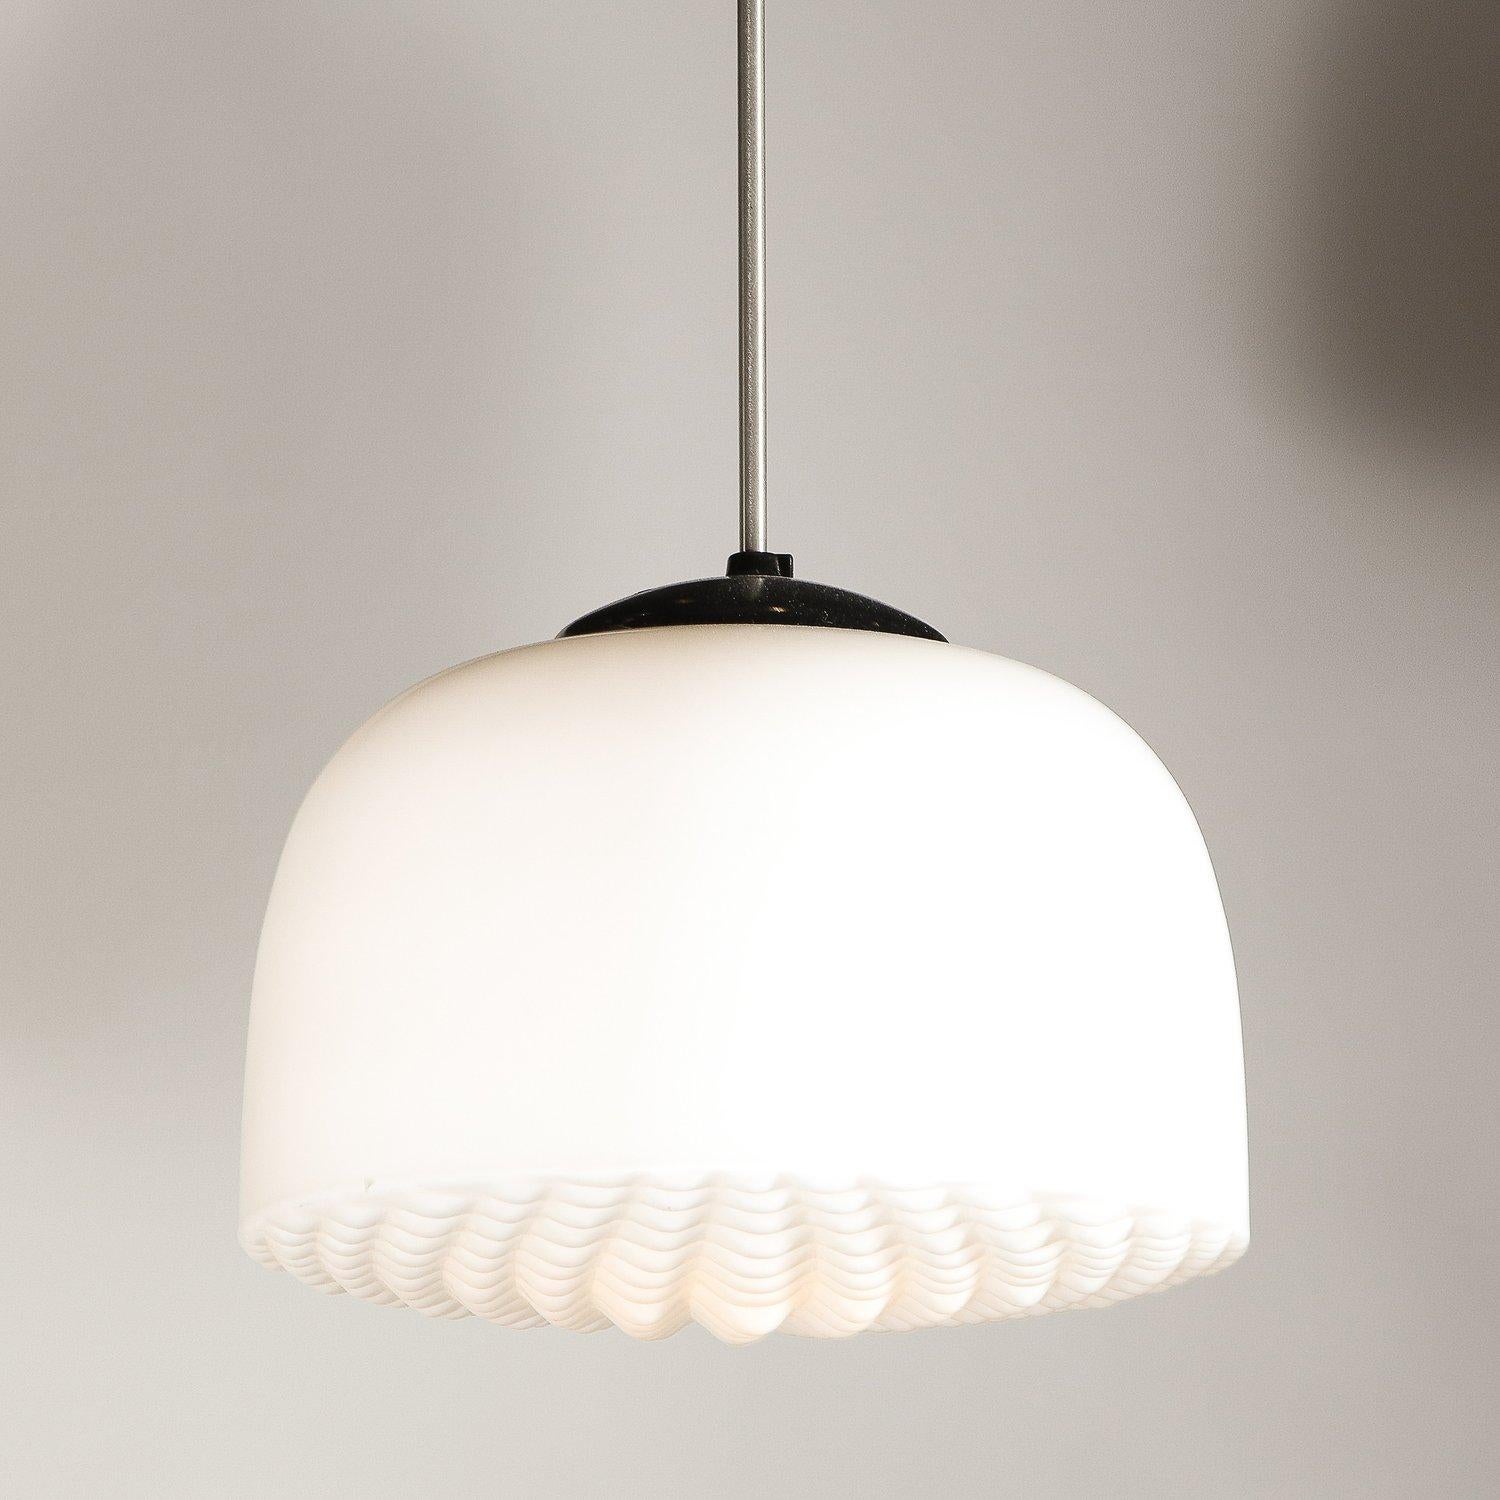 This refined Mid-Century Modern pendant was realized in the Czech Republic circa 1950. The feature graphic domed shade with a rectilinear 